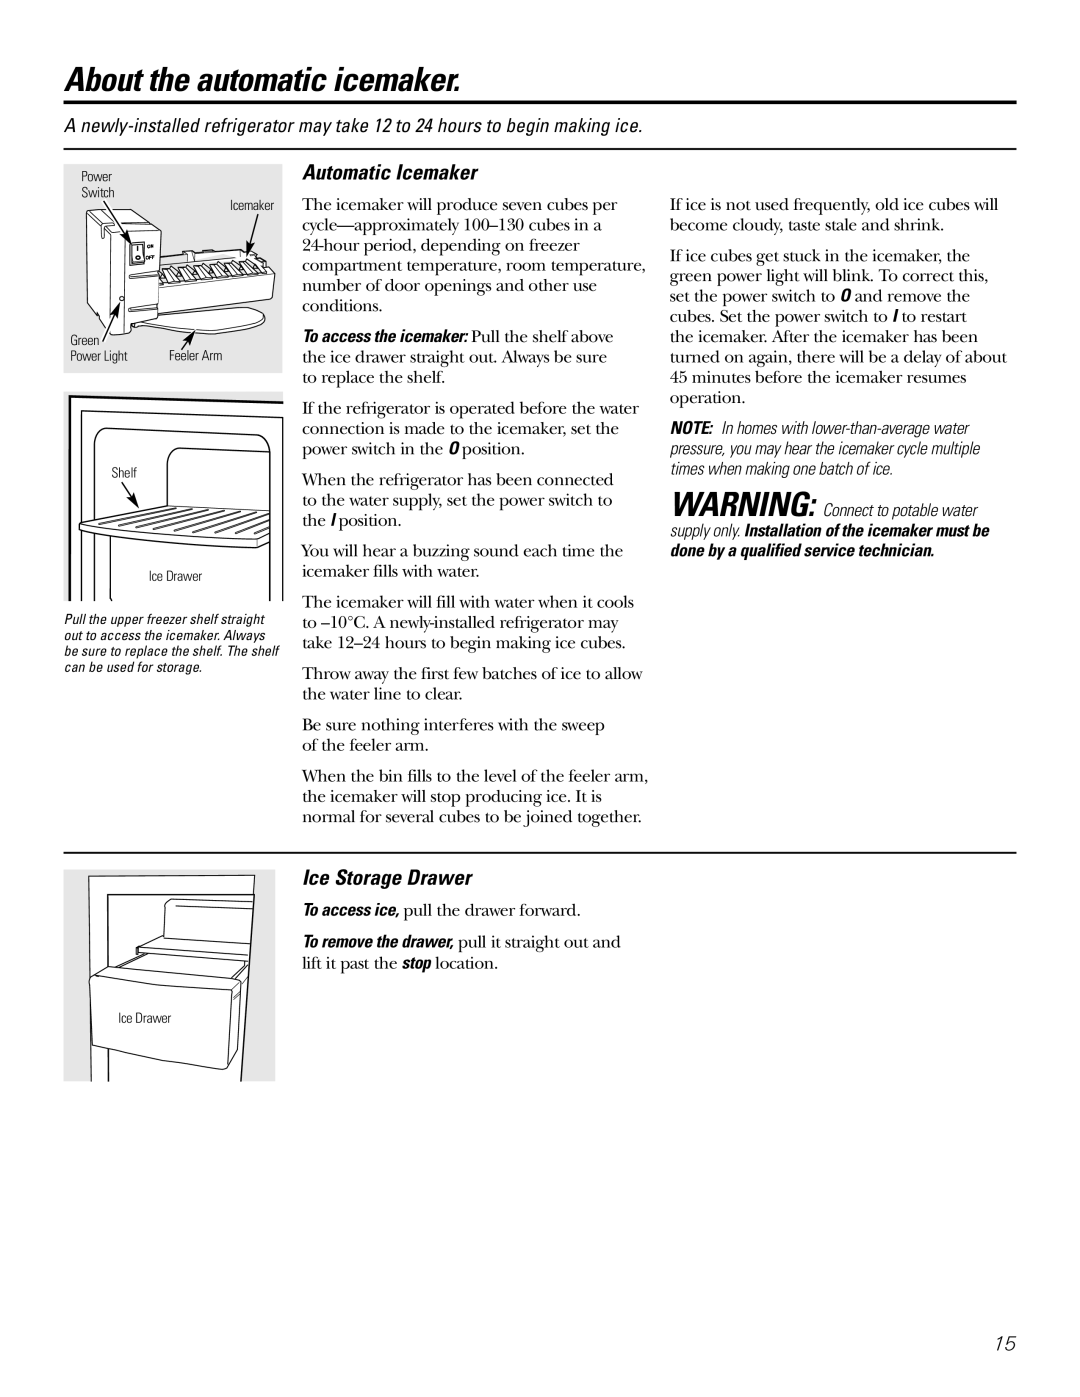 Hotpoint 23 operating instructions About the automatic icemaker, Automatic Icemaker, Ice Storage Drawer 